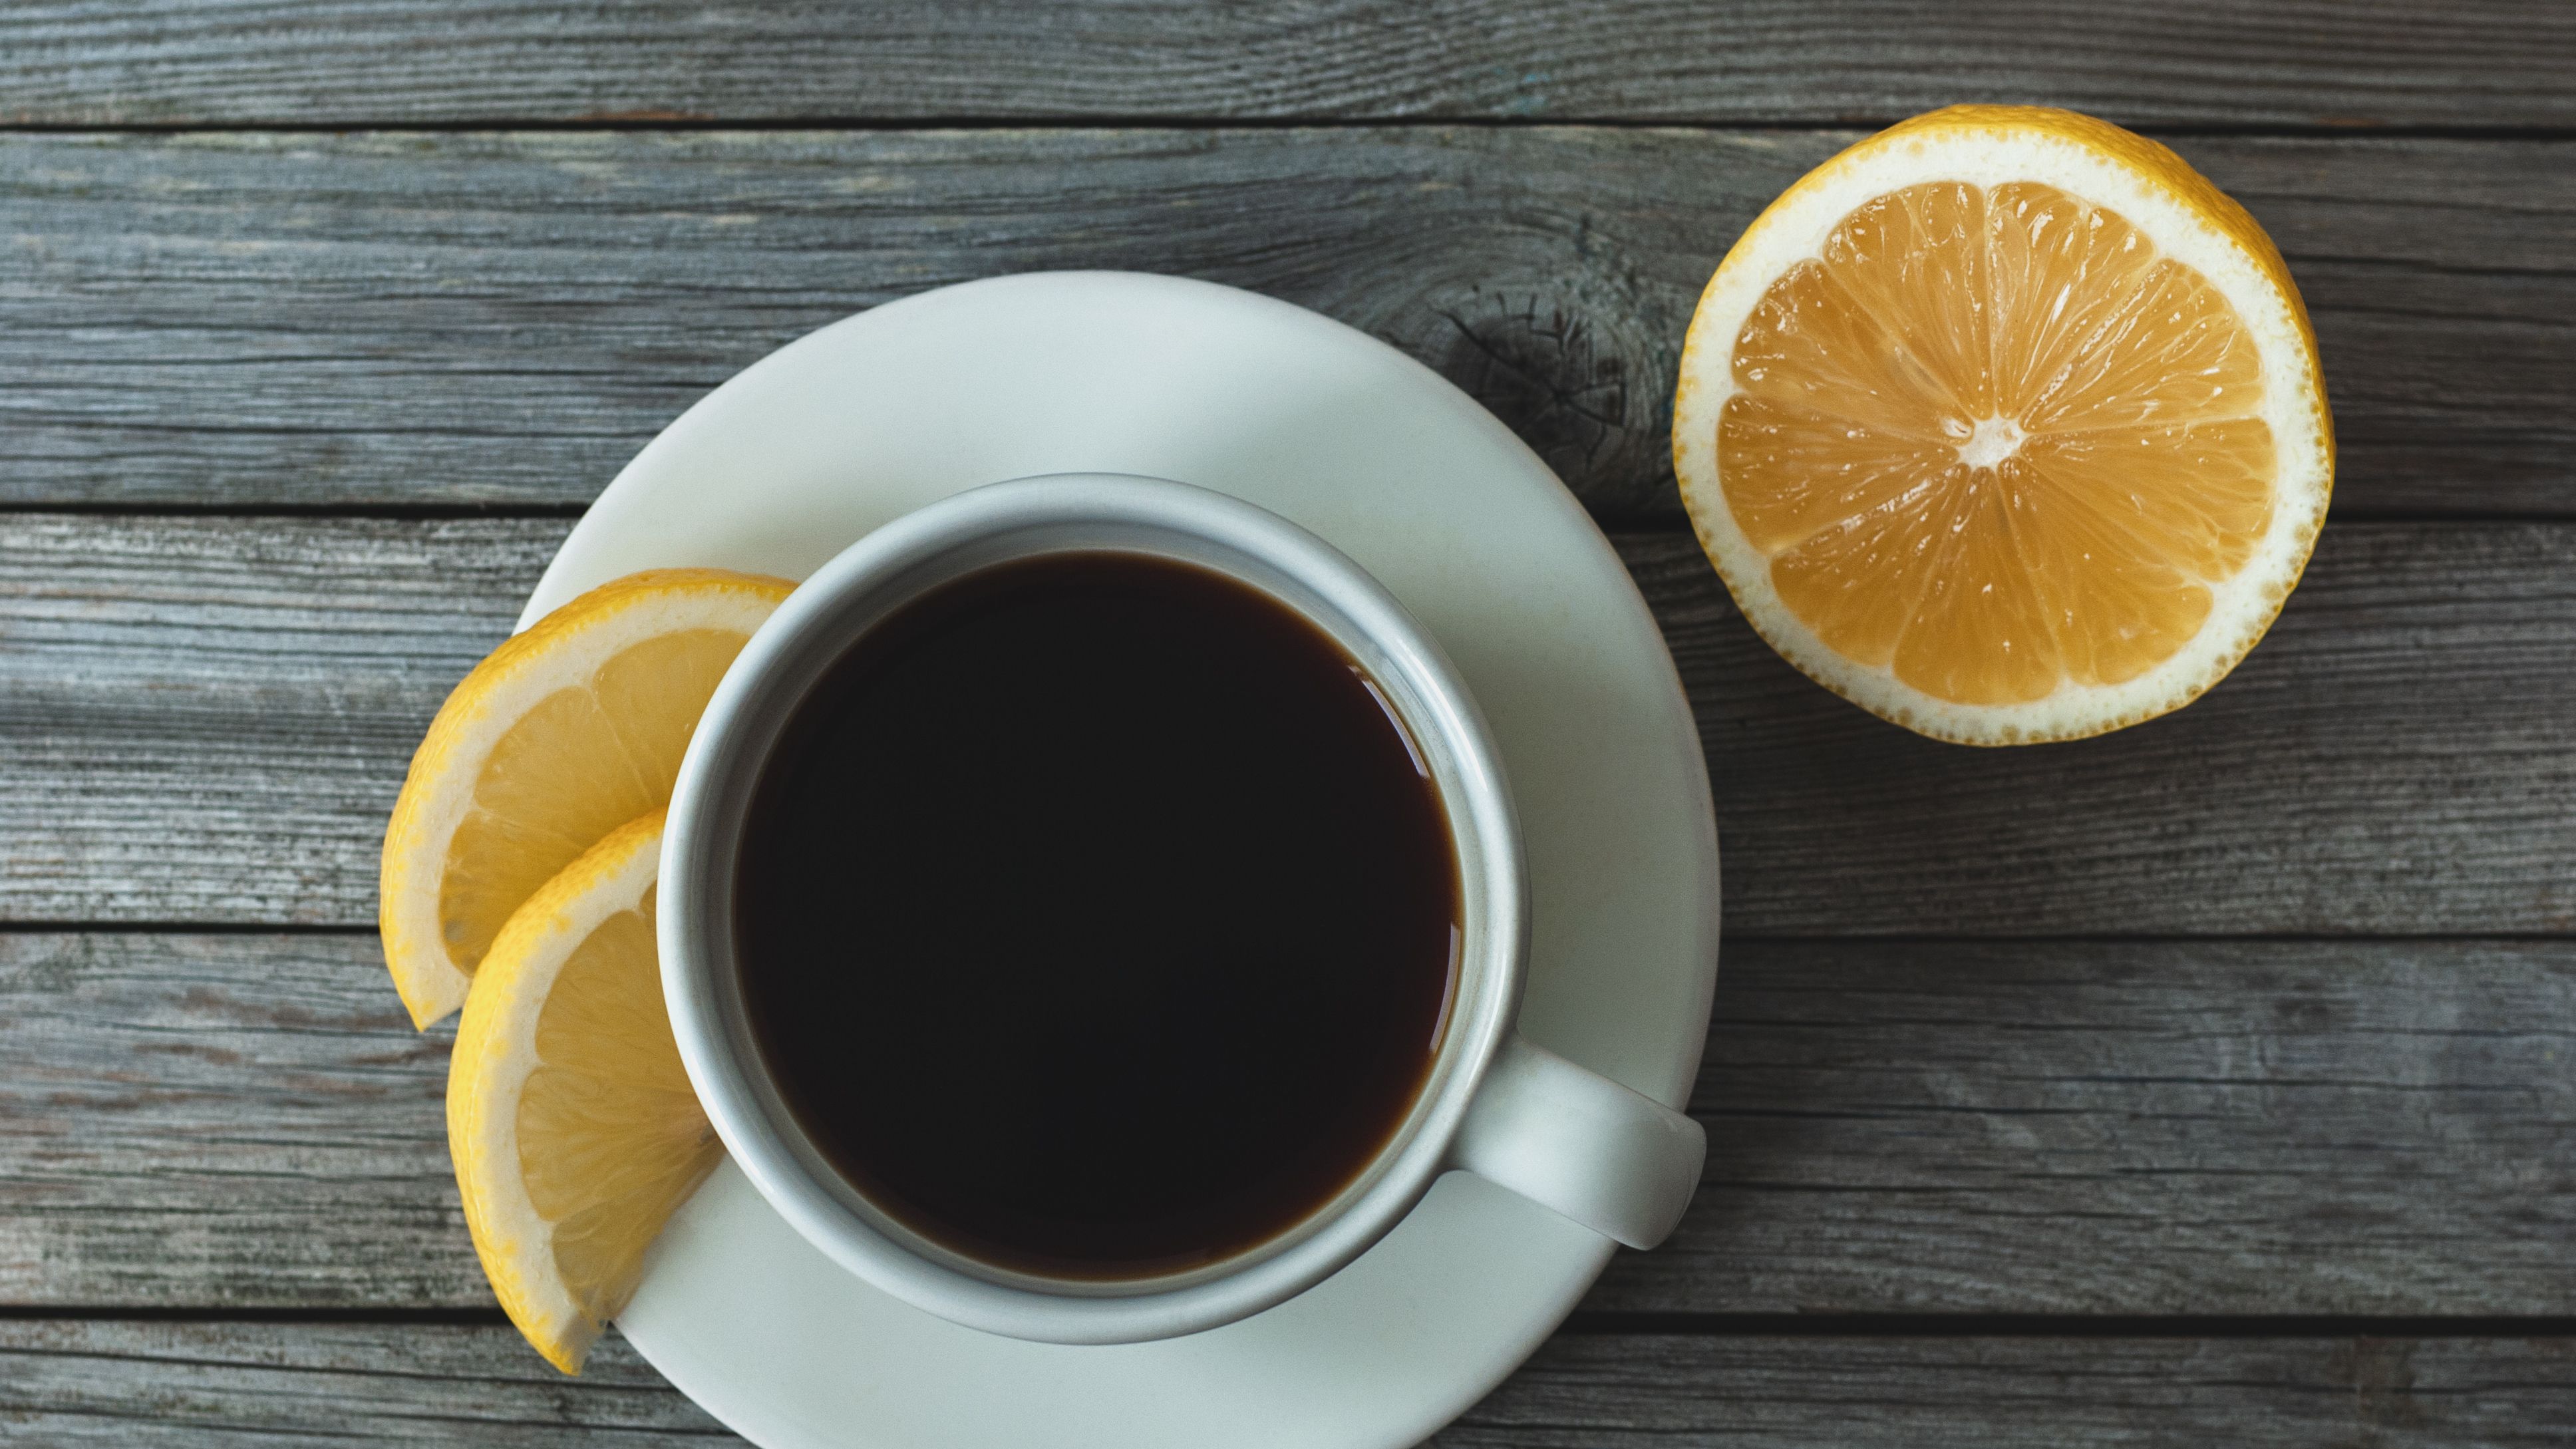 https://hips.hearstapps.com/hmg-prod/images/coffee-with-lemon-on-gray-wooden-background-table-royalty-free-image-1695223028.jpg?crop=1xw:0.84028xh;center,top